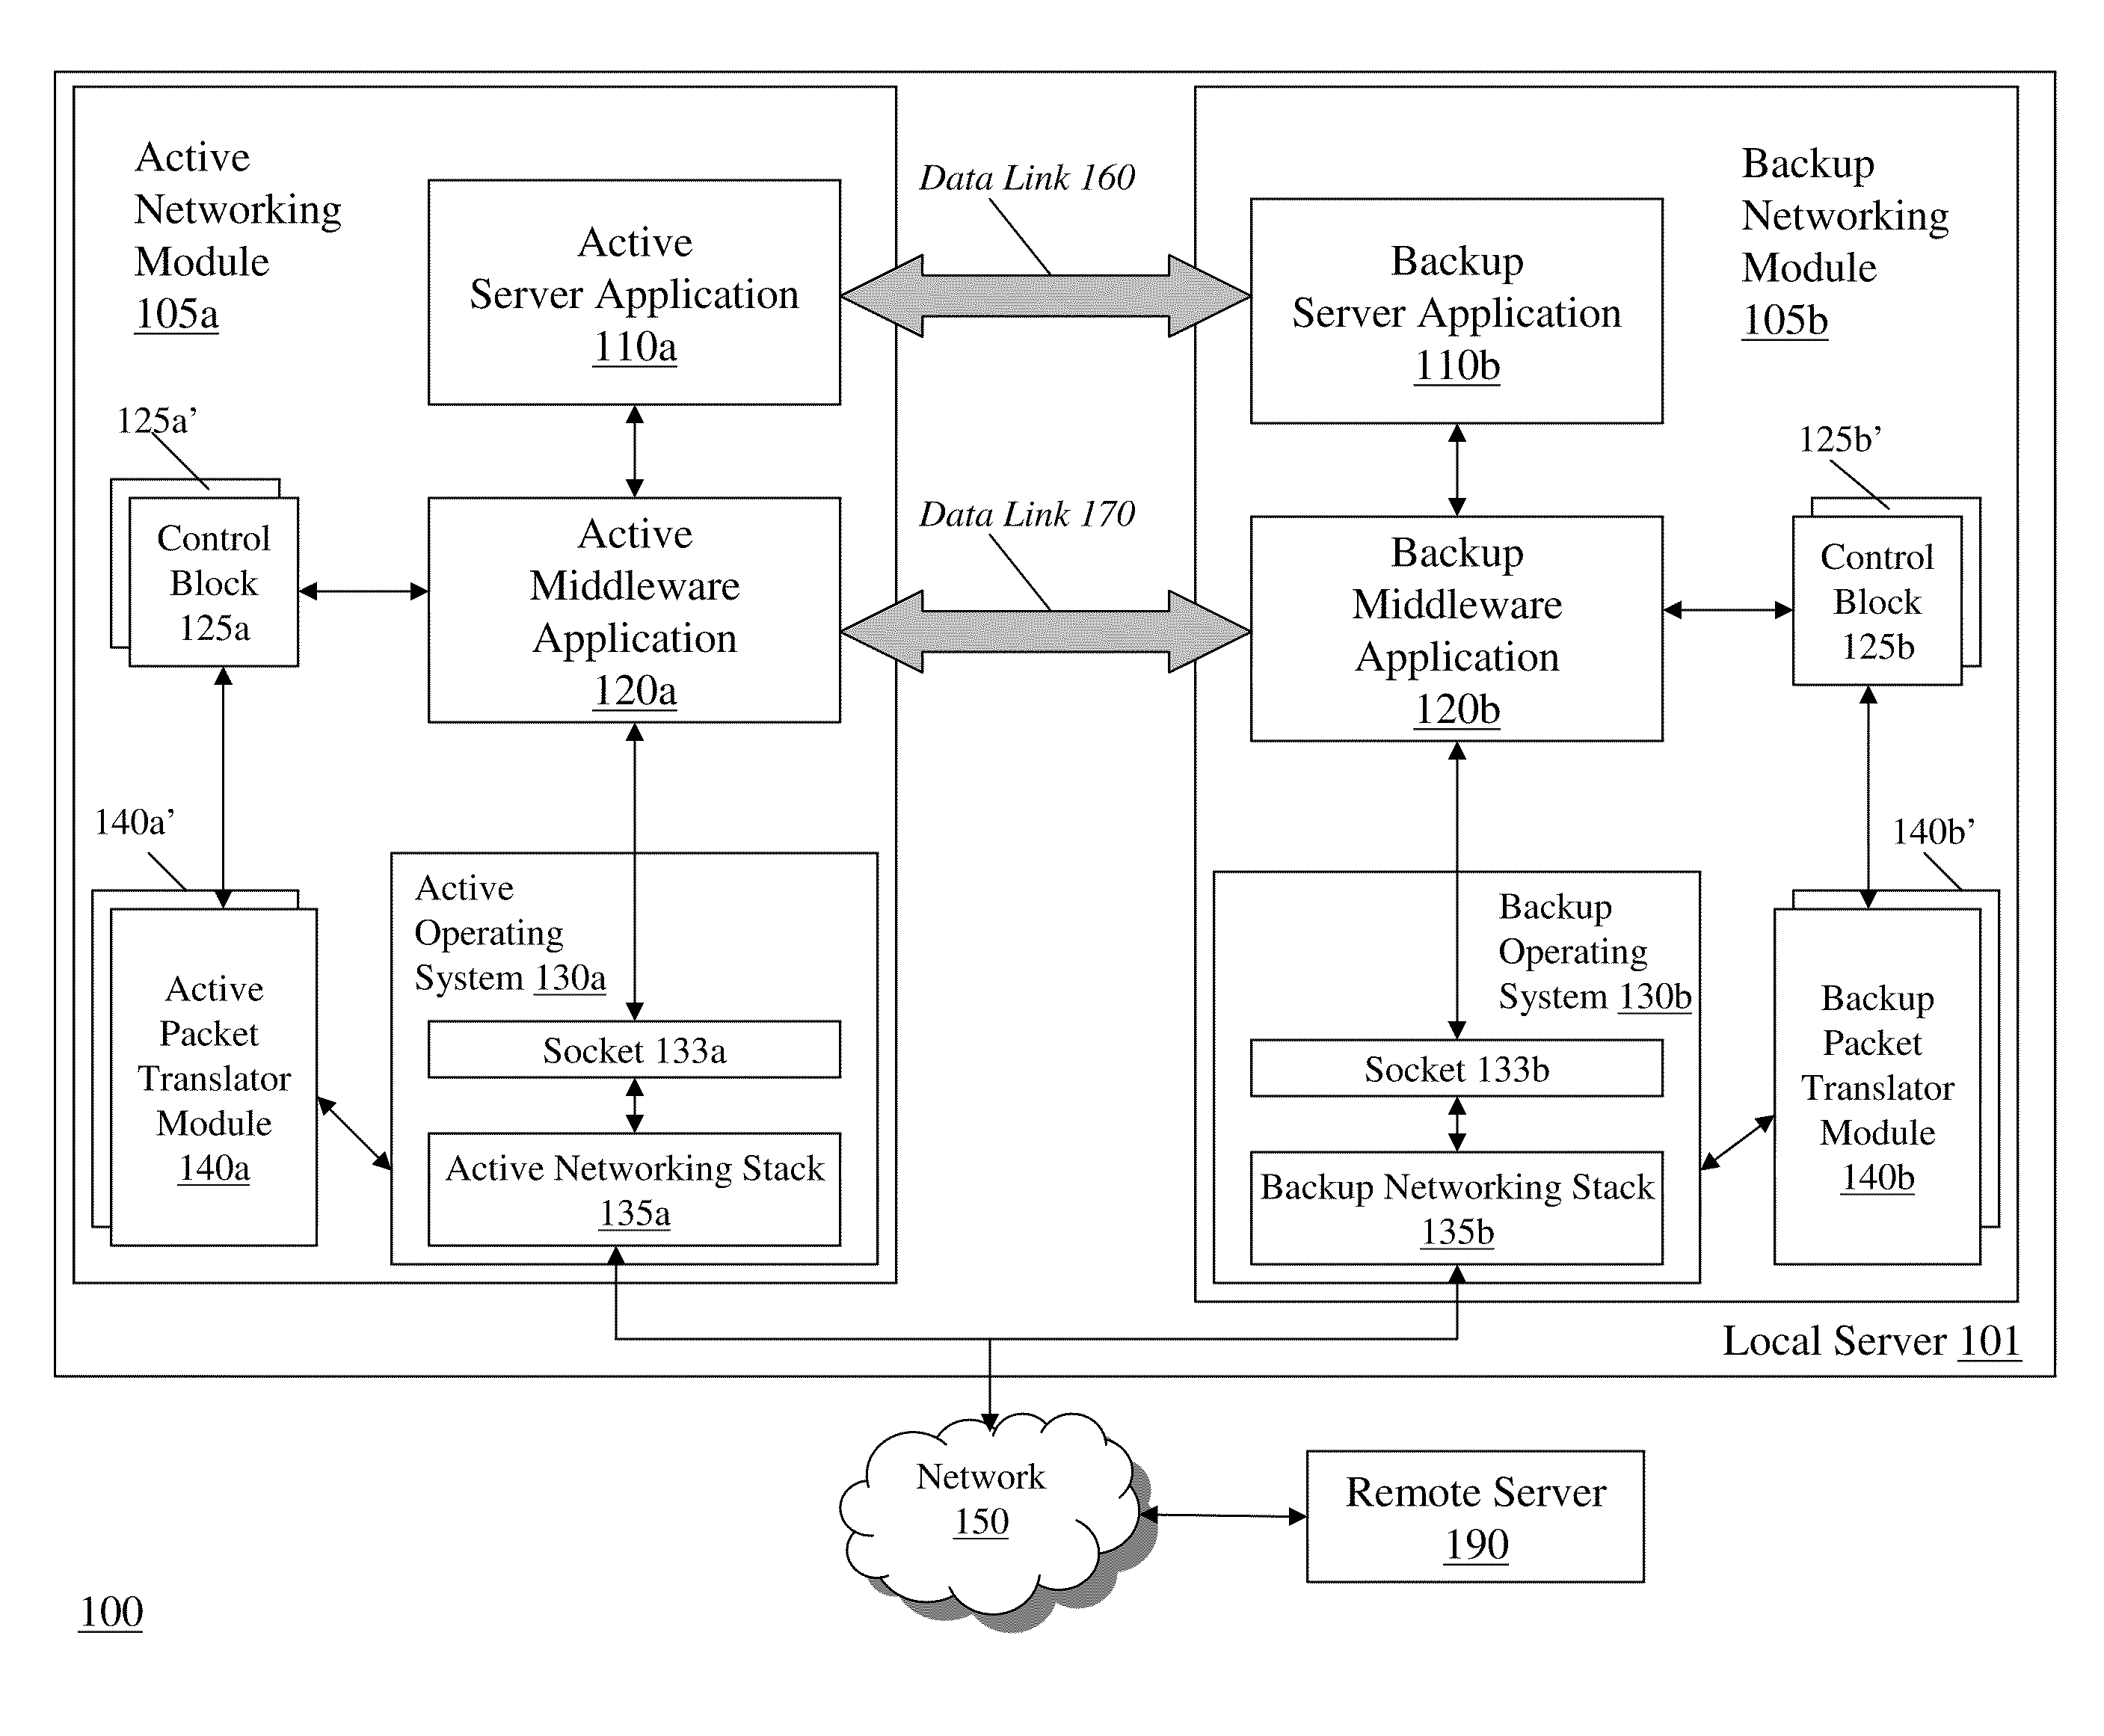 Transparent Recovery of Transport Connections Using Packet Translation Techniques